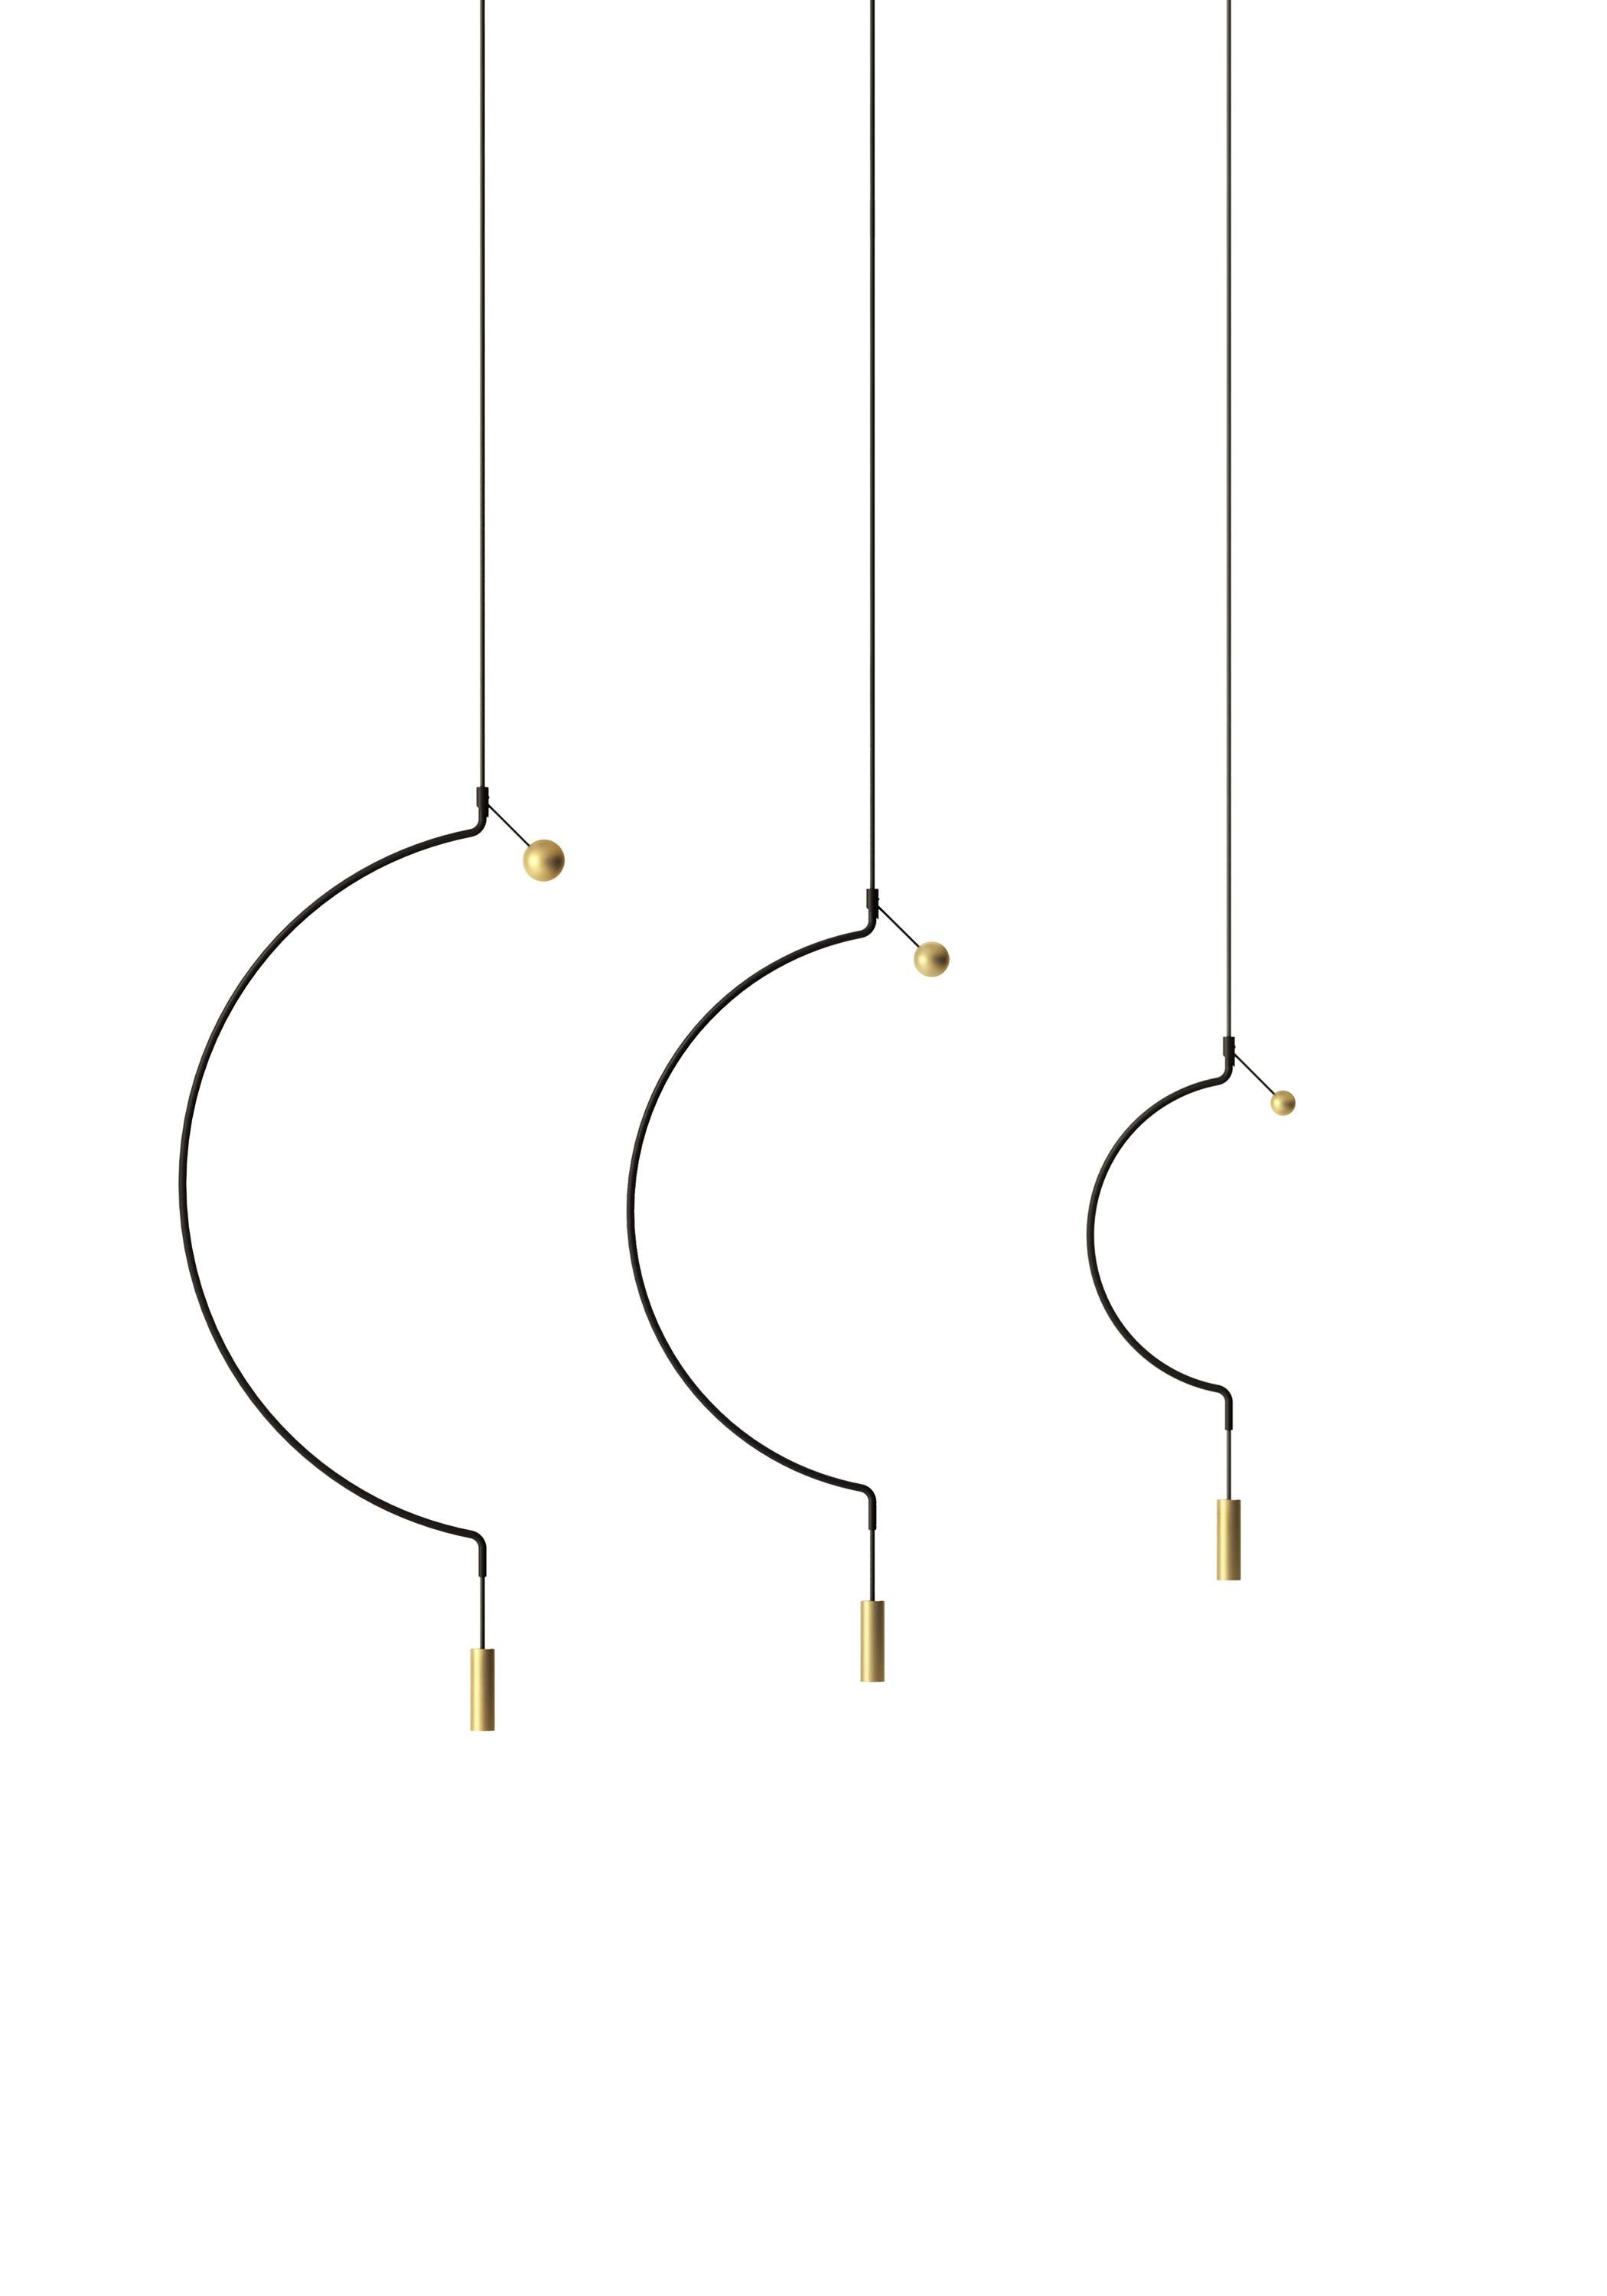 Axolight Liaison Model P1 Pendant Lamp in Black/Gold by Sara Moroni

Modular lightness and elegance. Liaison tells about the perfect balance of three geometric archetypes: sphere, circle and cylinder compose a system that includes the single pendant